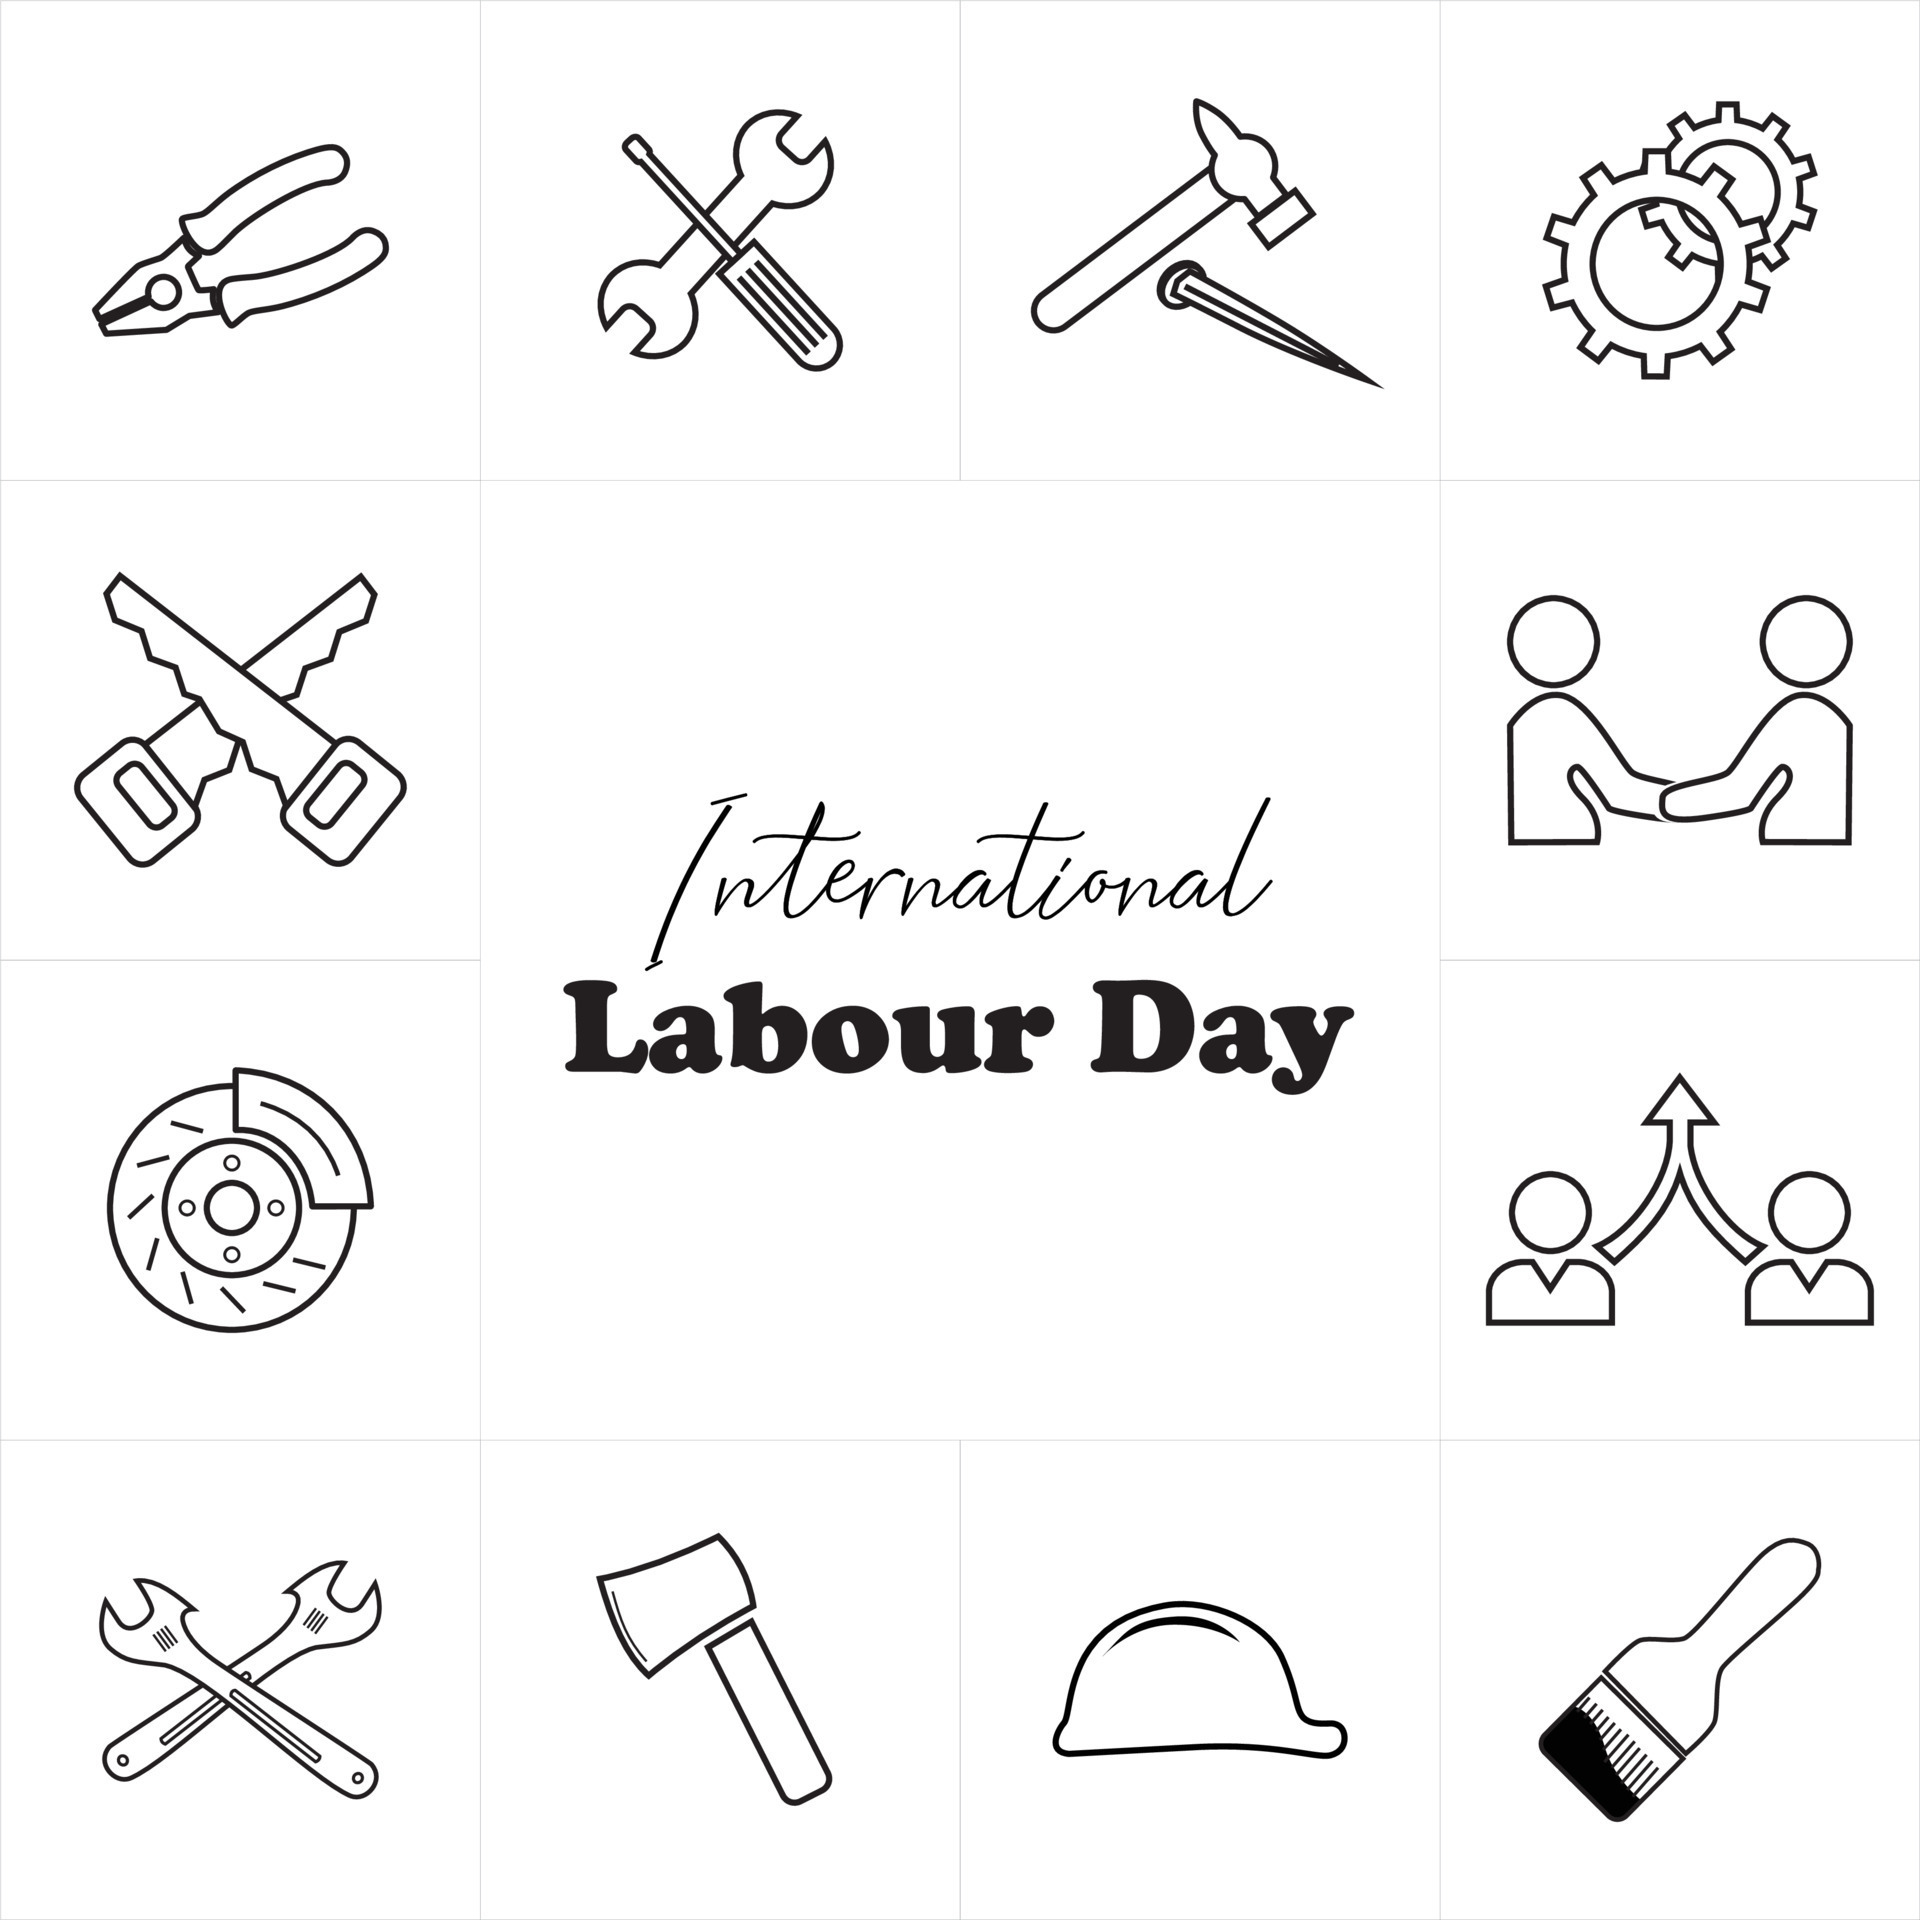 Labour day one line drawing hand continuous drawn Vector Image-saigonsouth.com.vn